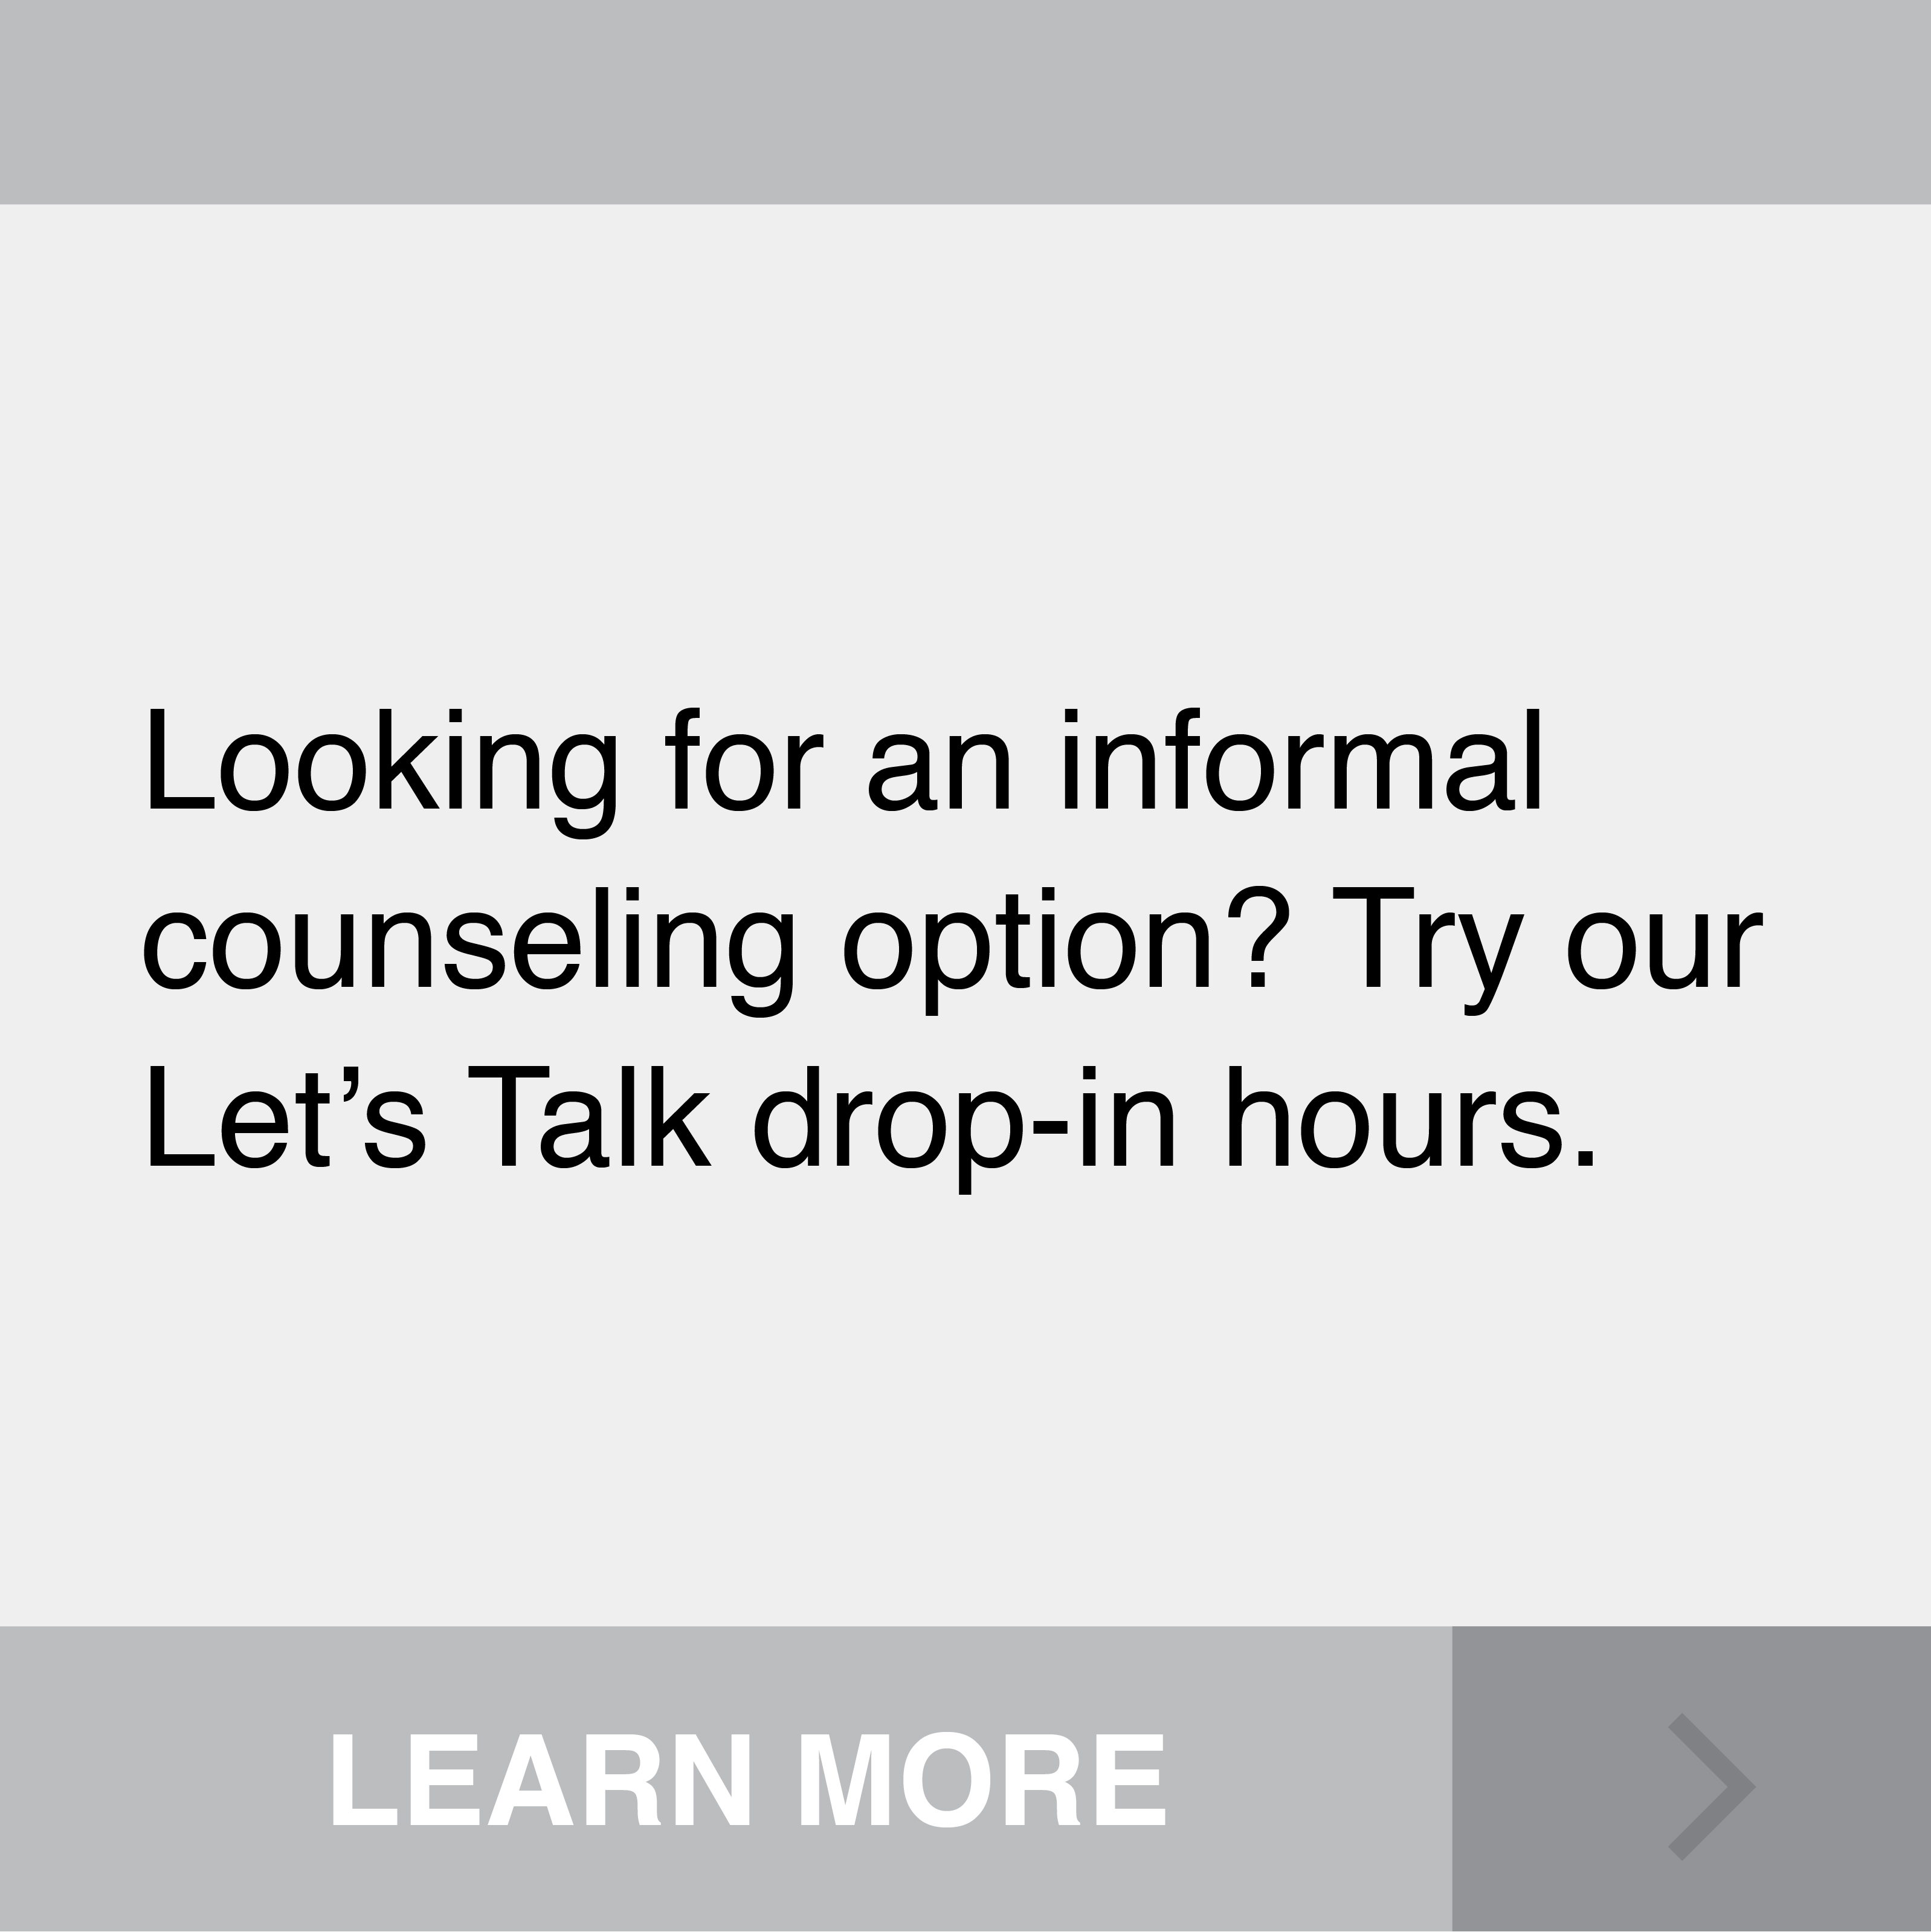 Looking for an informal counseling option? Try our Let's Talk drop-in hours. Click to Learn More.